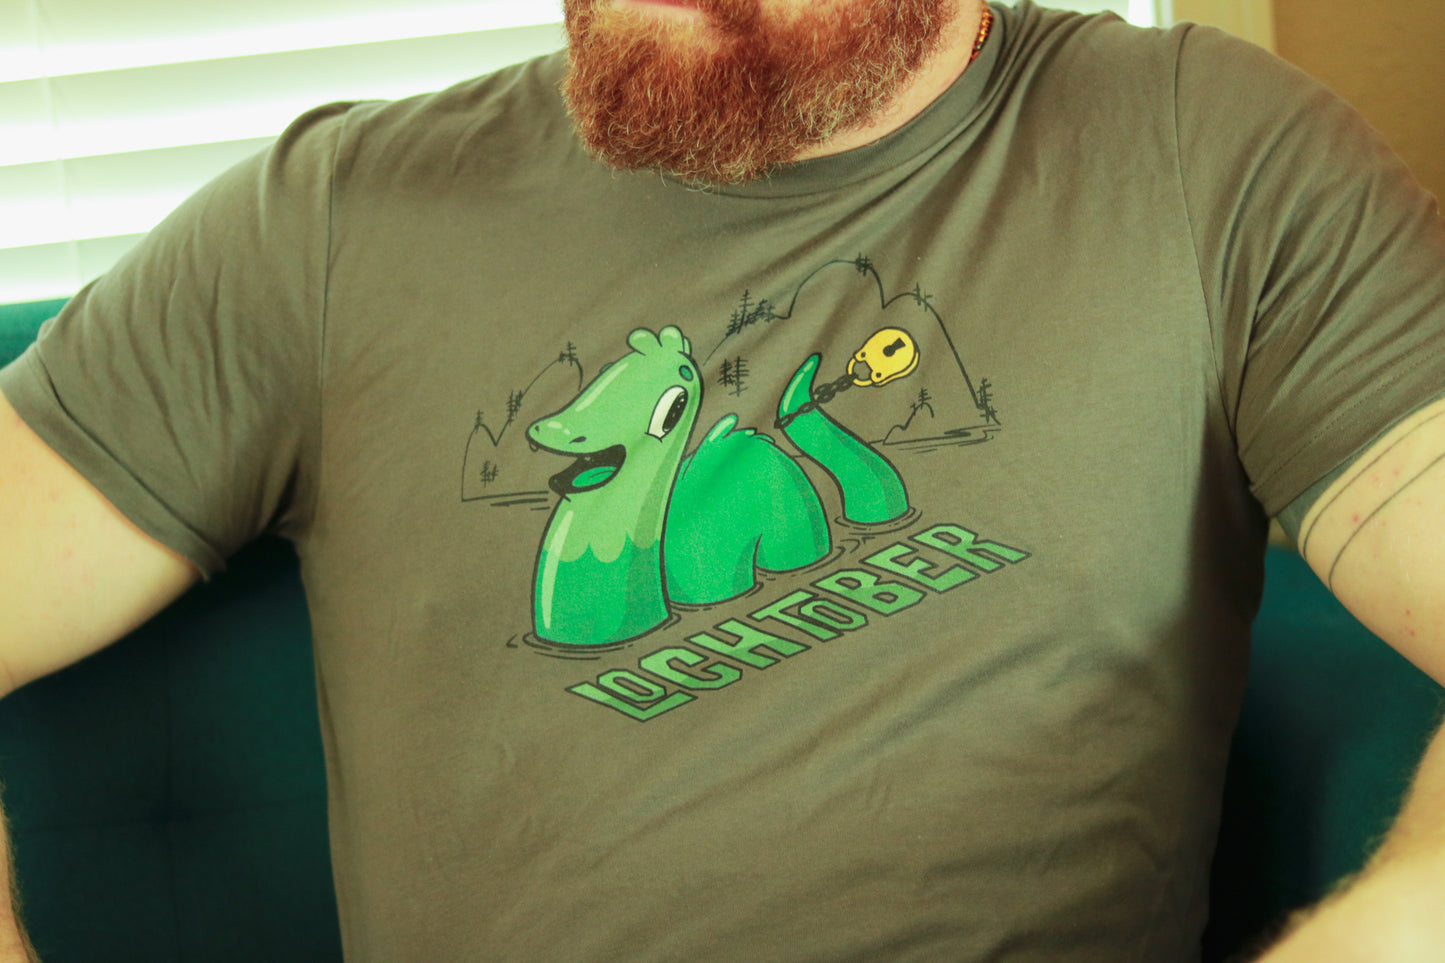 Grey Lochtober shirt featuring lochness monster with lock around tail, worn by bearded ginger.